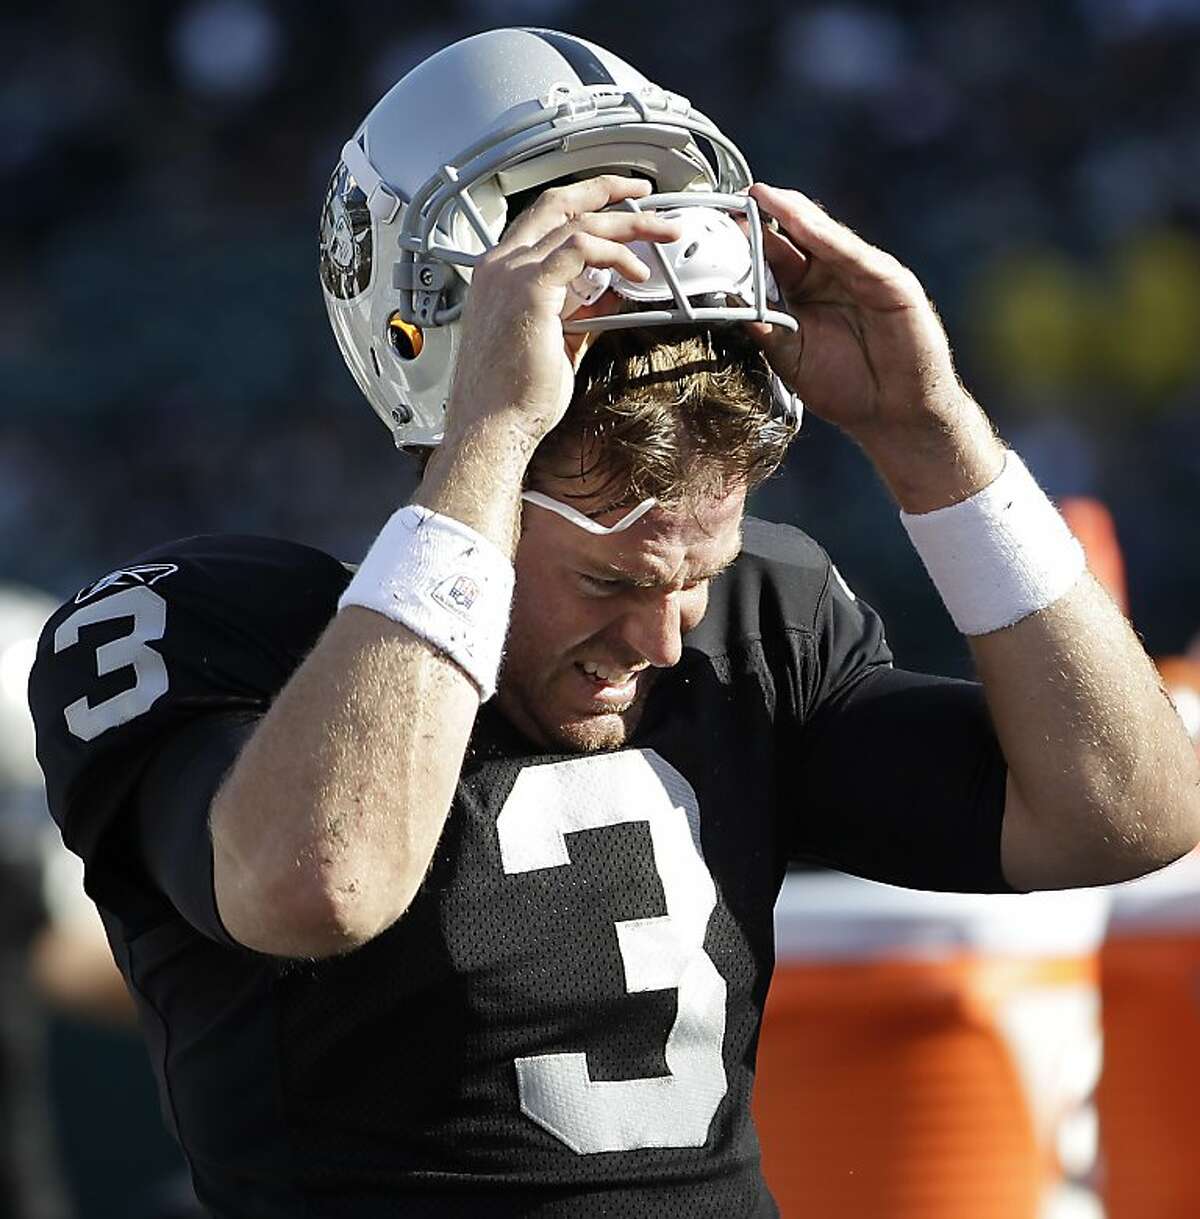 Oakland Raiders quarterback Carson Palmer walks to the sideline in the fourth quarter of an NFL football game against the Kansas City Chiefs in Oakland, Calif., Sunday, Oct. 23, 2011. (AP Photo/Paul Sakuma)